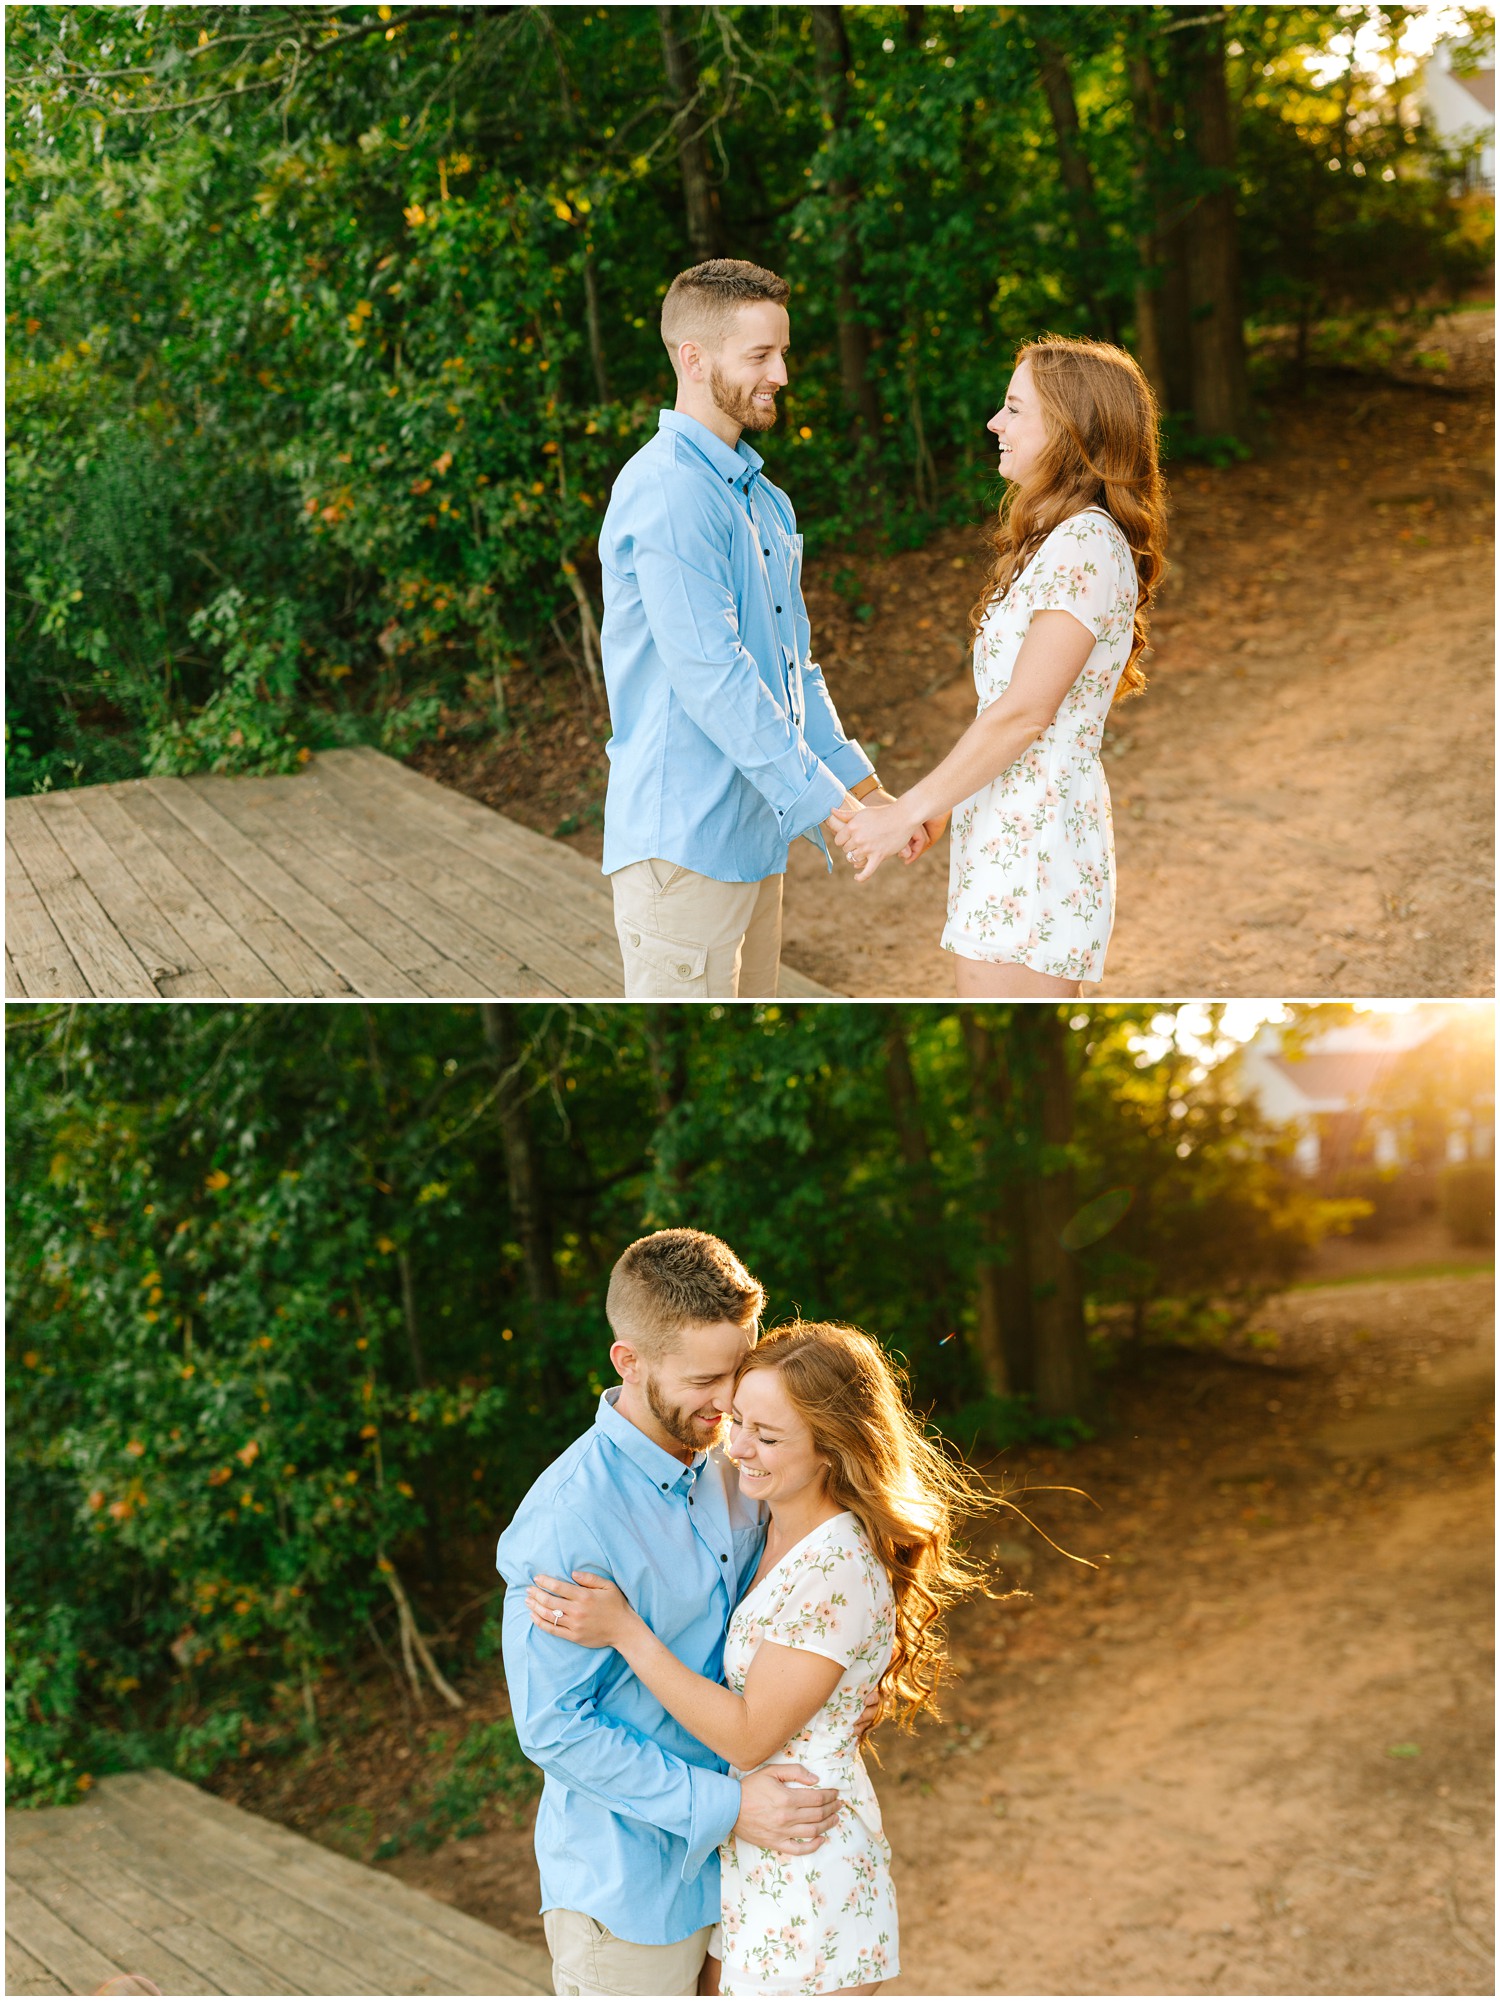 Raleigh North Carolina engagement session during sunset photographed by Chelsea Renay